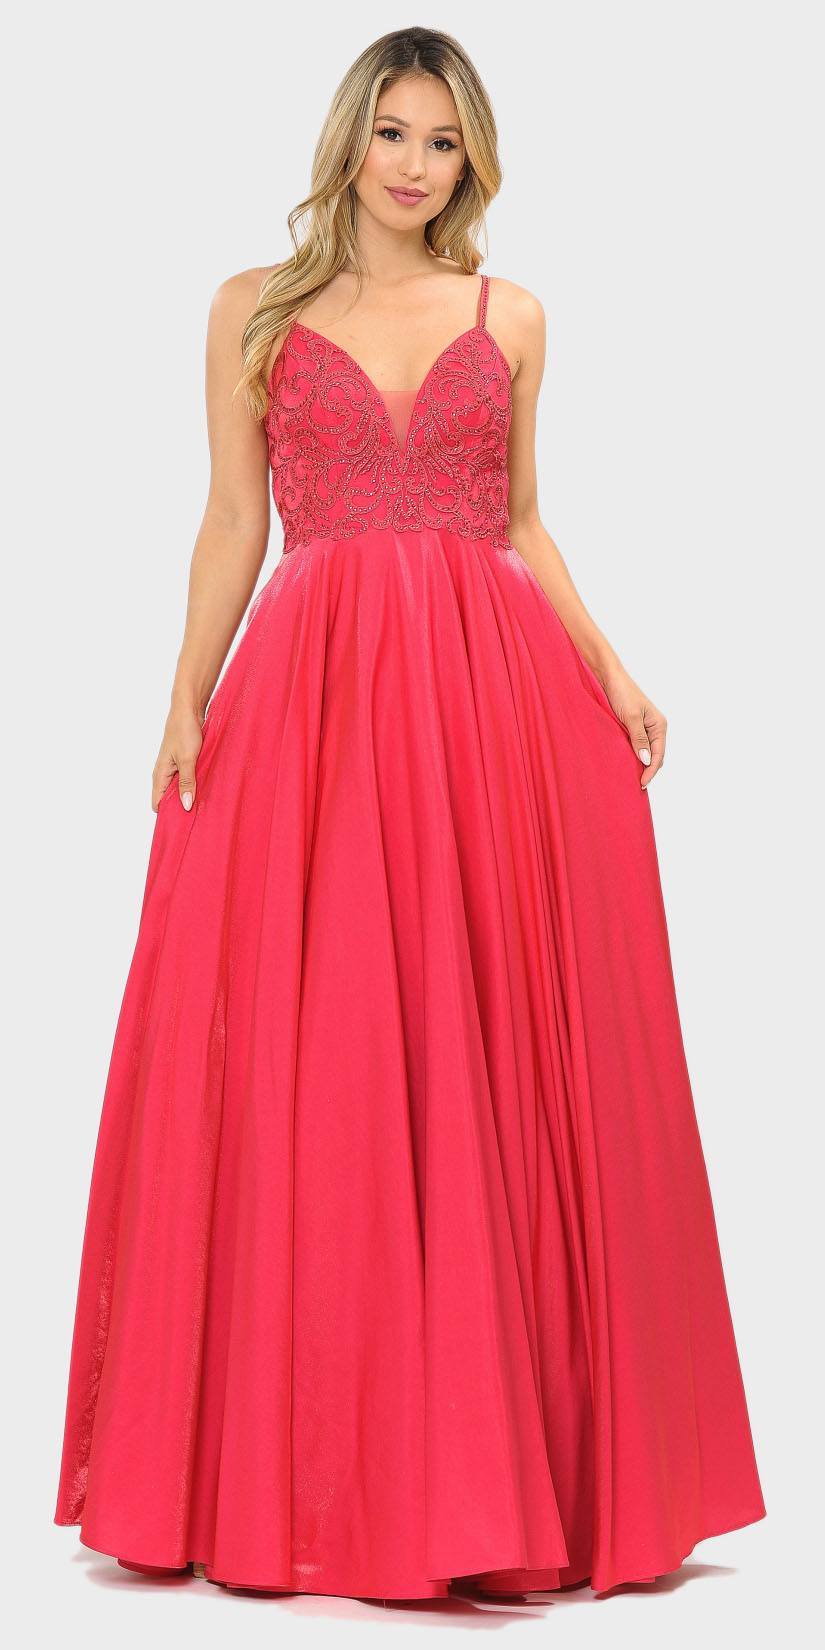 Poly USA 8576 Beaded Long Prom Dress with Pockets Hot Pink